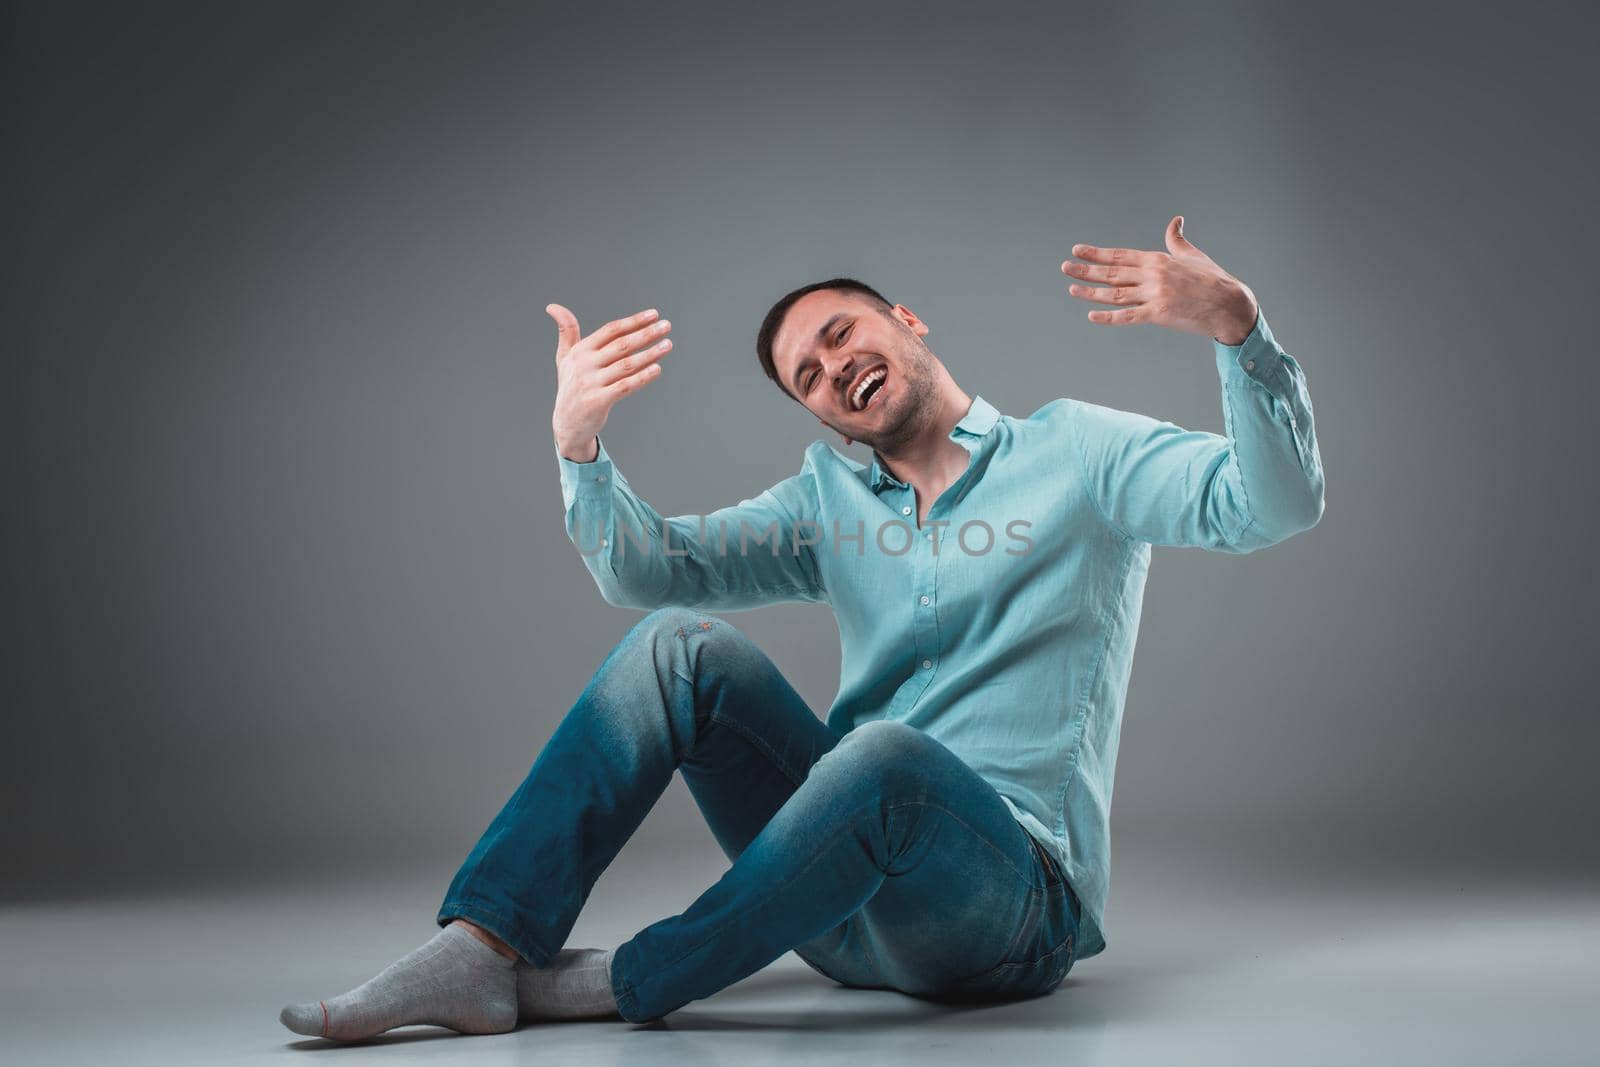 Appealing casual young man sitting on the floor, looking to the camera smiling. Studio shot.